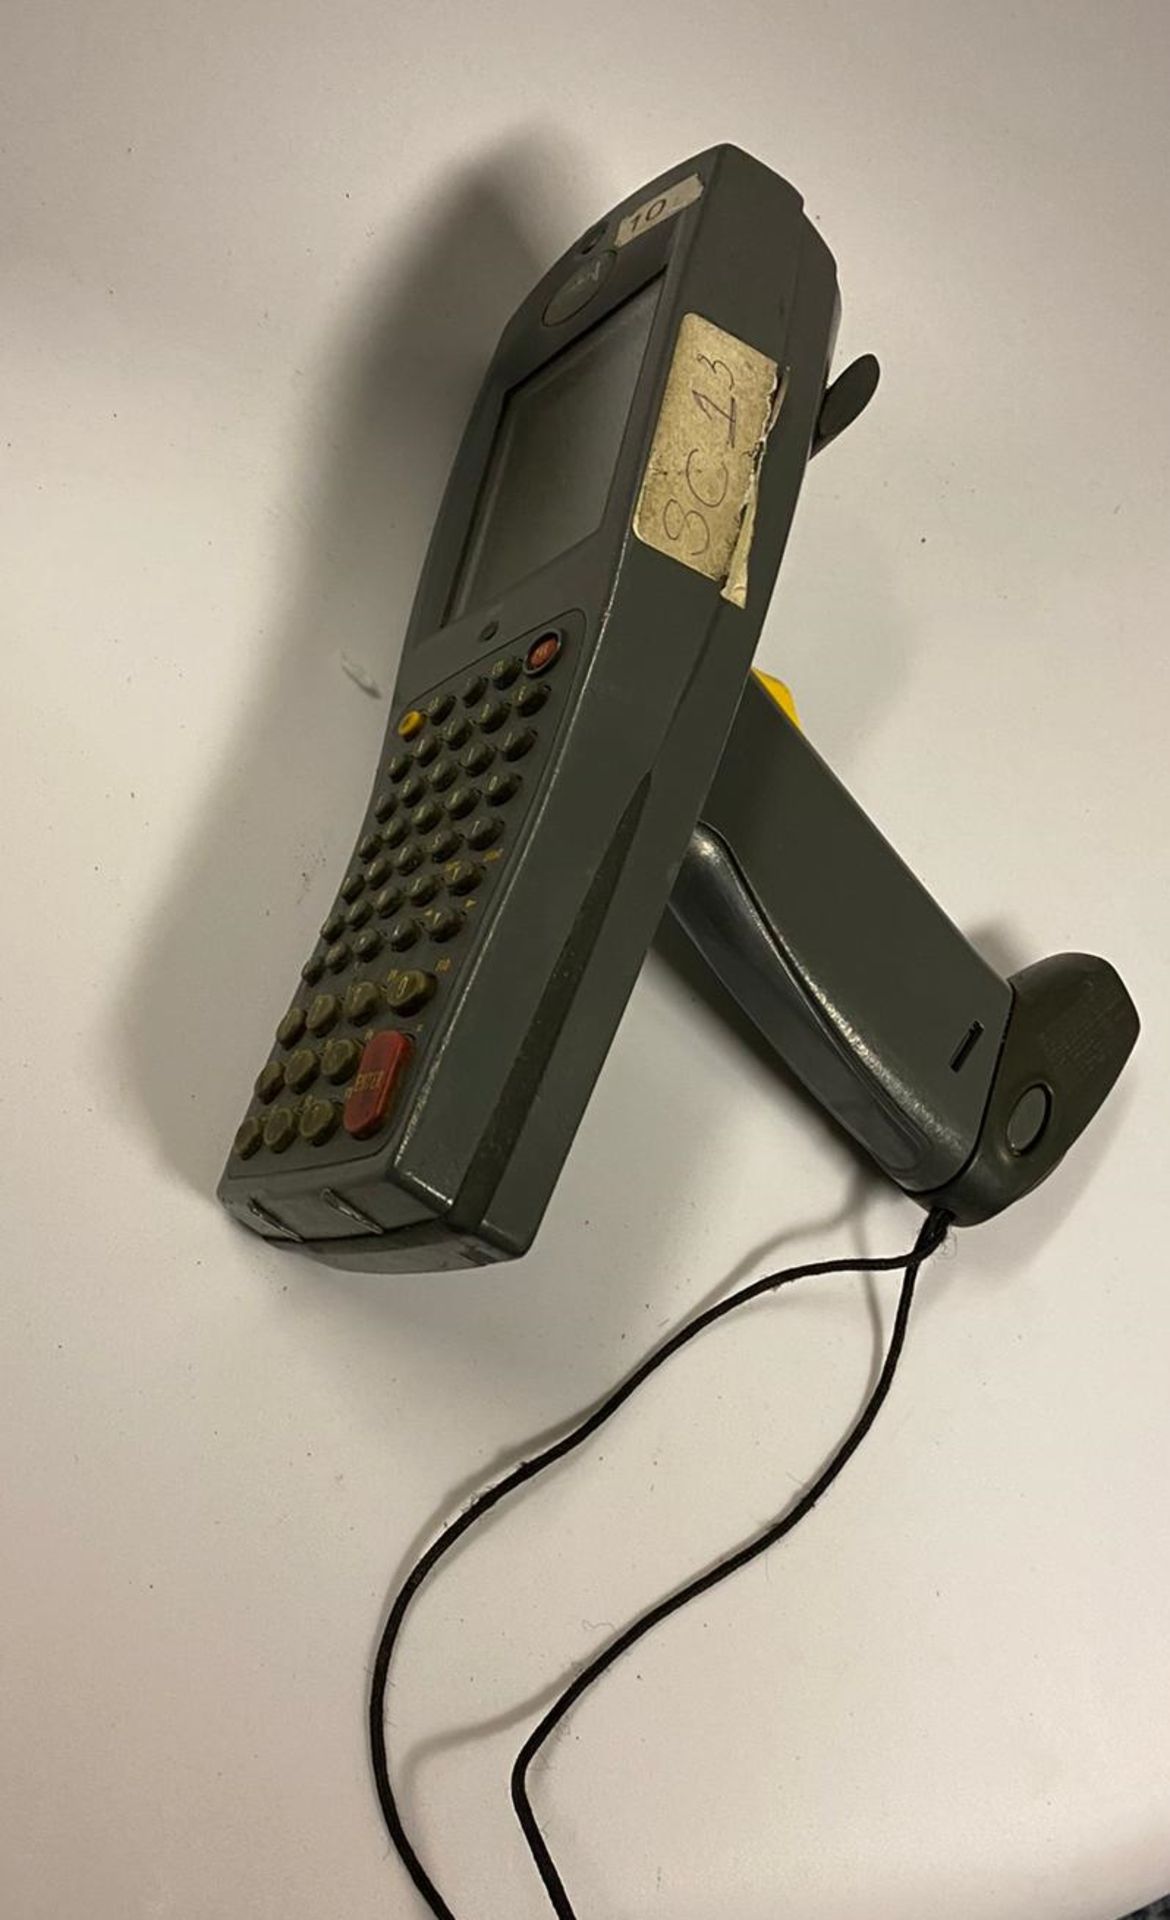 13 x Symbol PDT-6840 Barcode Scanners - CL011 -  Ref MS158 WH2 - Location: Altrincham WA14 Pre-owned - Image 5 of 5